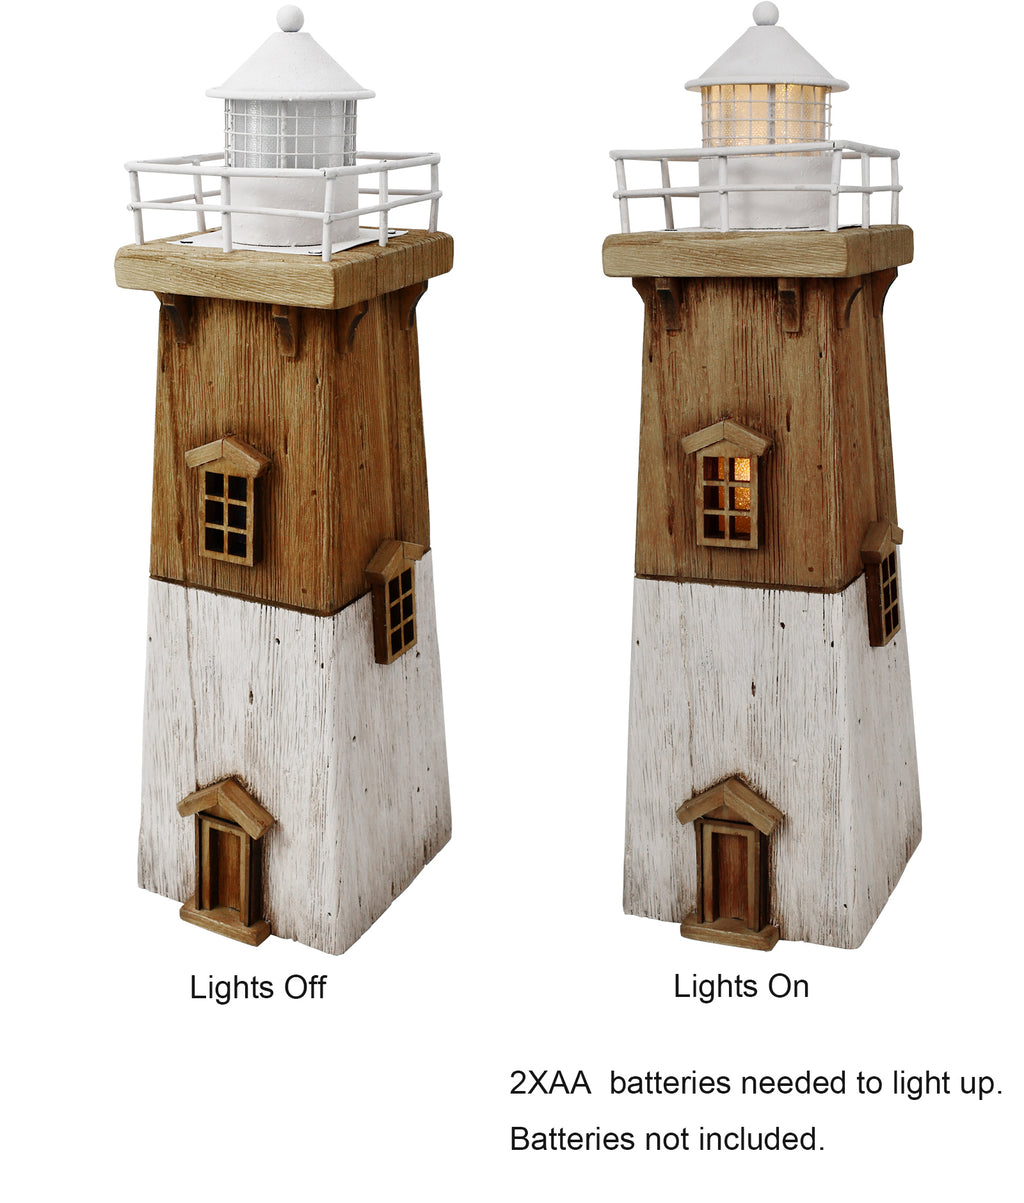 Lighthouse with lights 13.78"